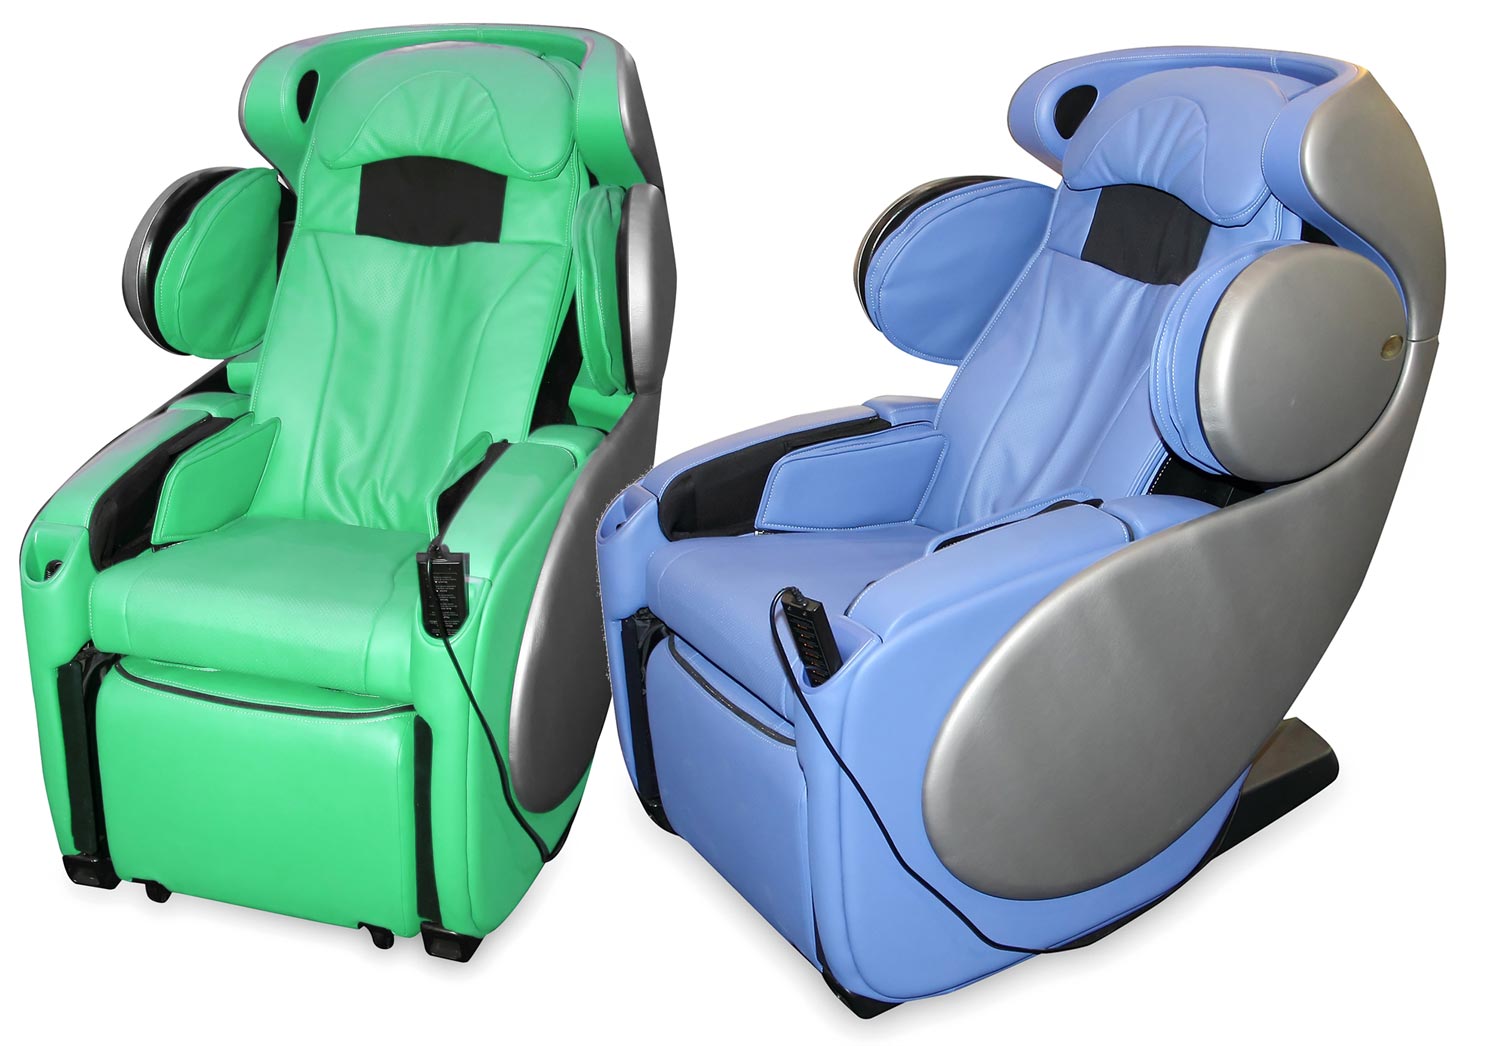 Massage Chairs, a luxury stress relief at home